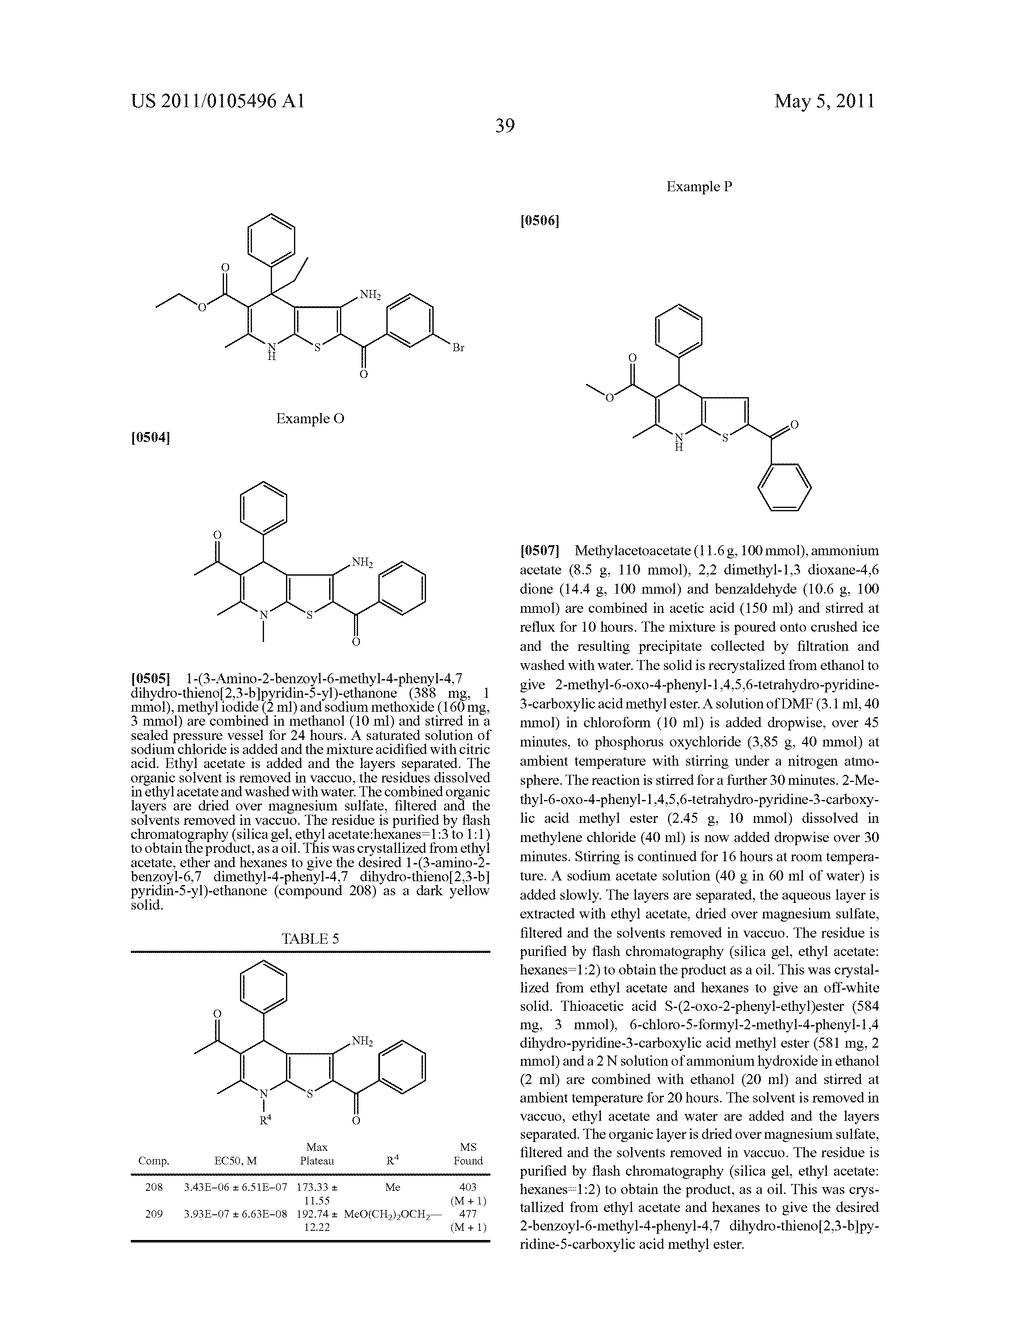 Methods For The Treatment Of Myosin Heavy Chain-Mediated Conditions Using 4,7-Dihydrothieno[2,3-B]Pyridine Compounds - diagram, schematic, and image 41